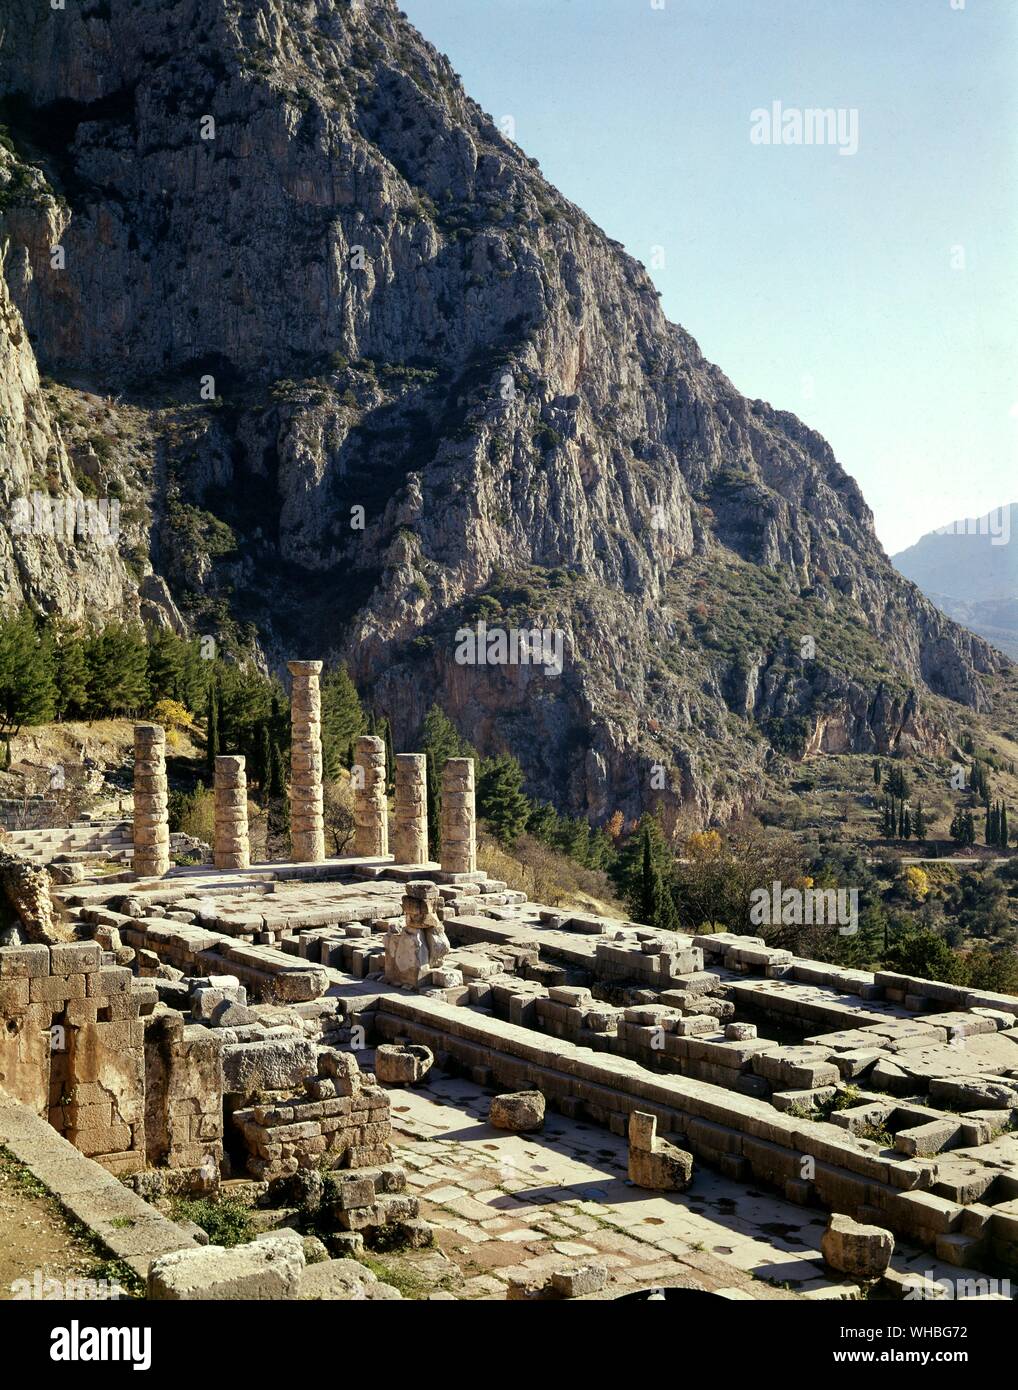 Delphi, Greece - an archaeological site and a modern town in Greece on the south-western spur of Mount Parnassus in the valley of Phocis. Delphi was the site of the Delphic oracle, most important oracle in the classical Greek world, and it was a major site for the worship of the god Apollo. . Stock Photo